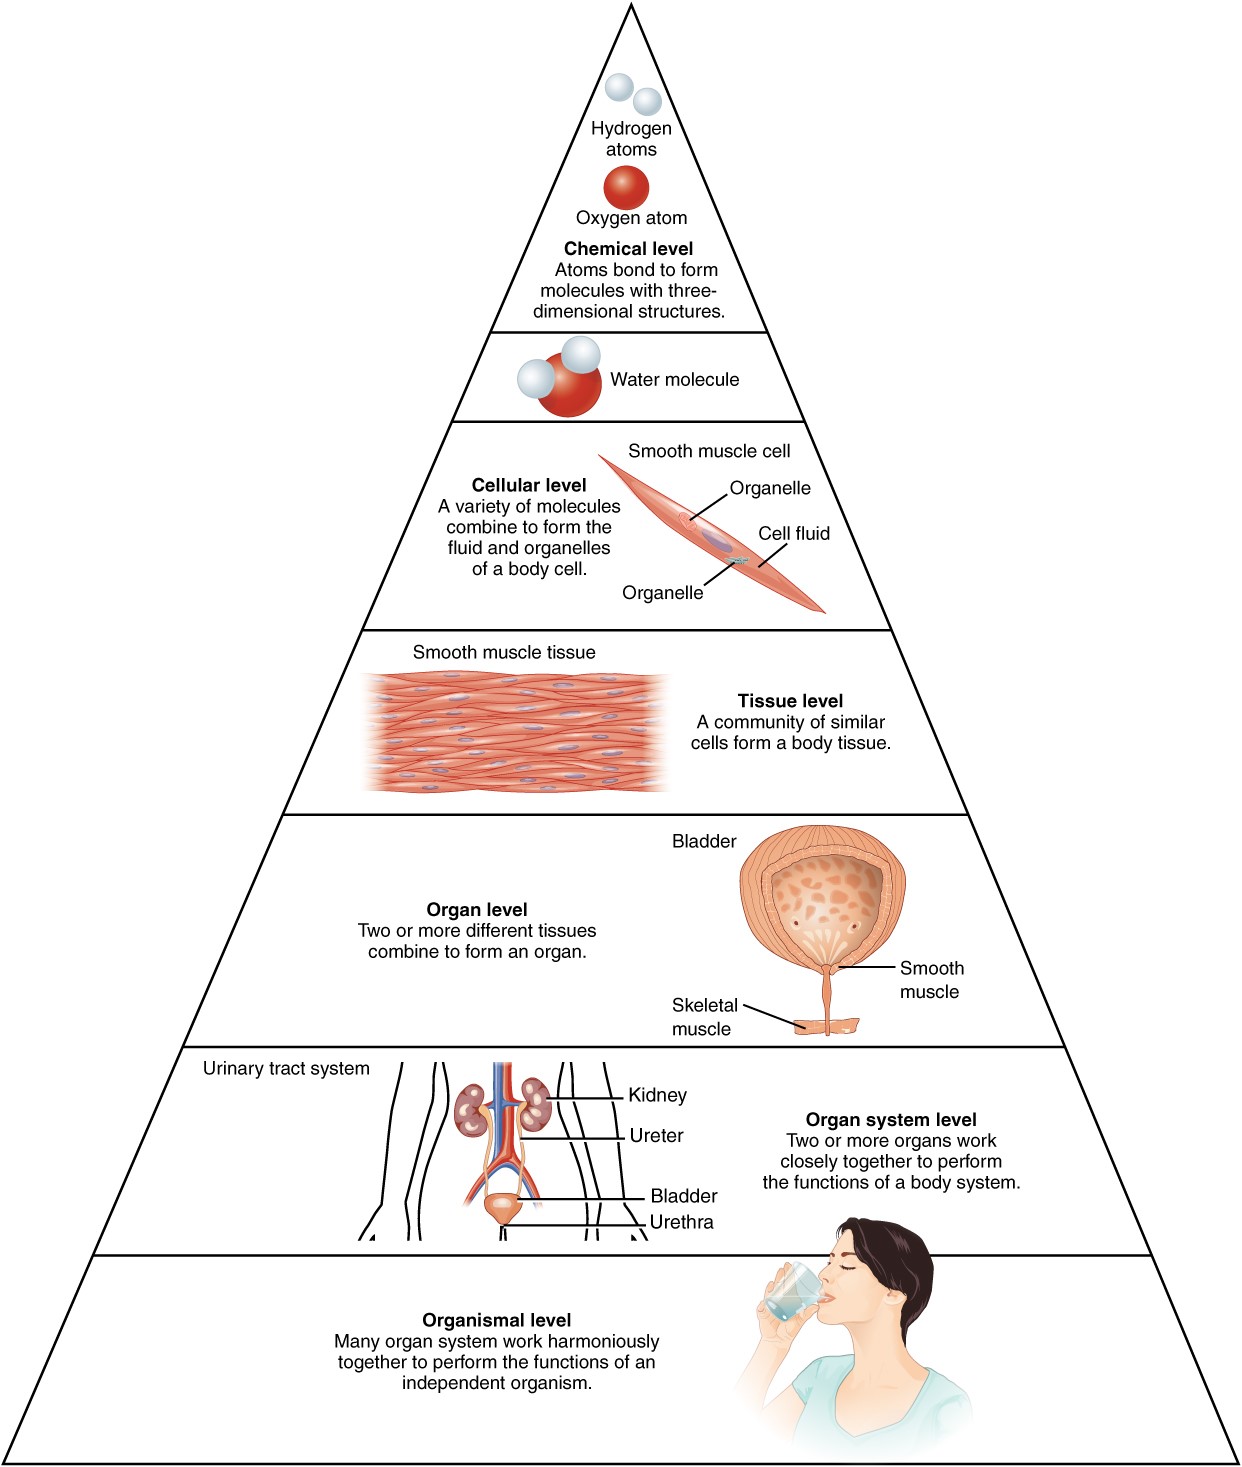 Pyramid showing the levels of organization from atoms to molecules to cells to tissues to organs to systems to organism.